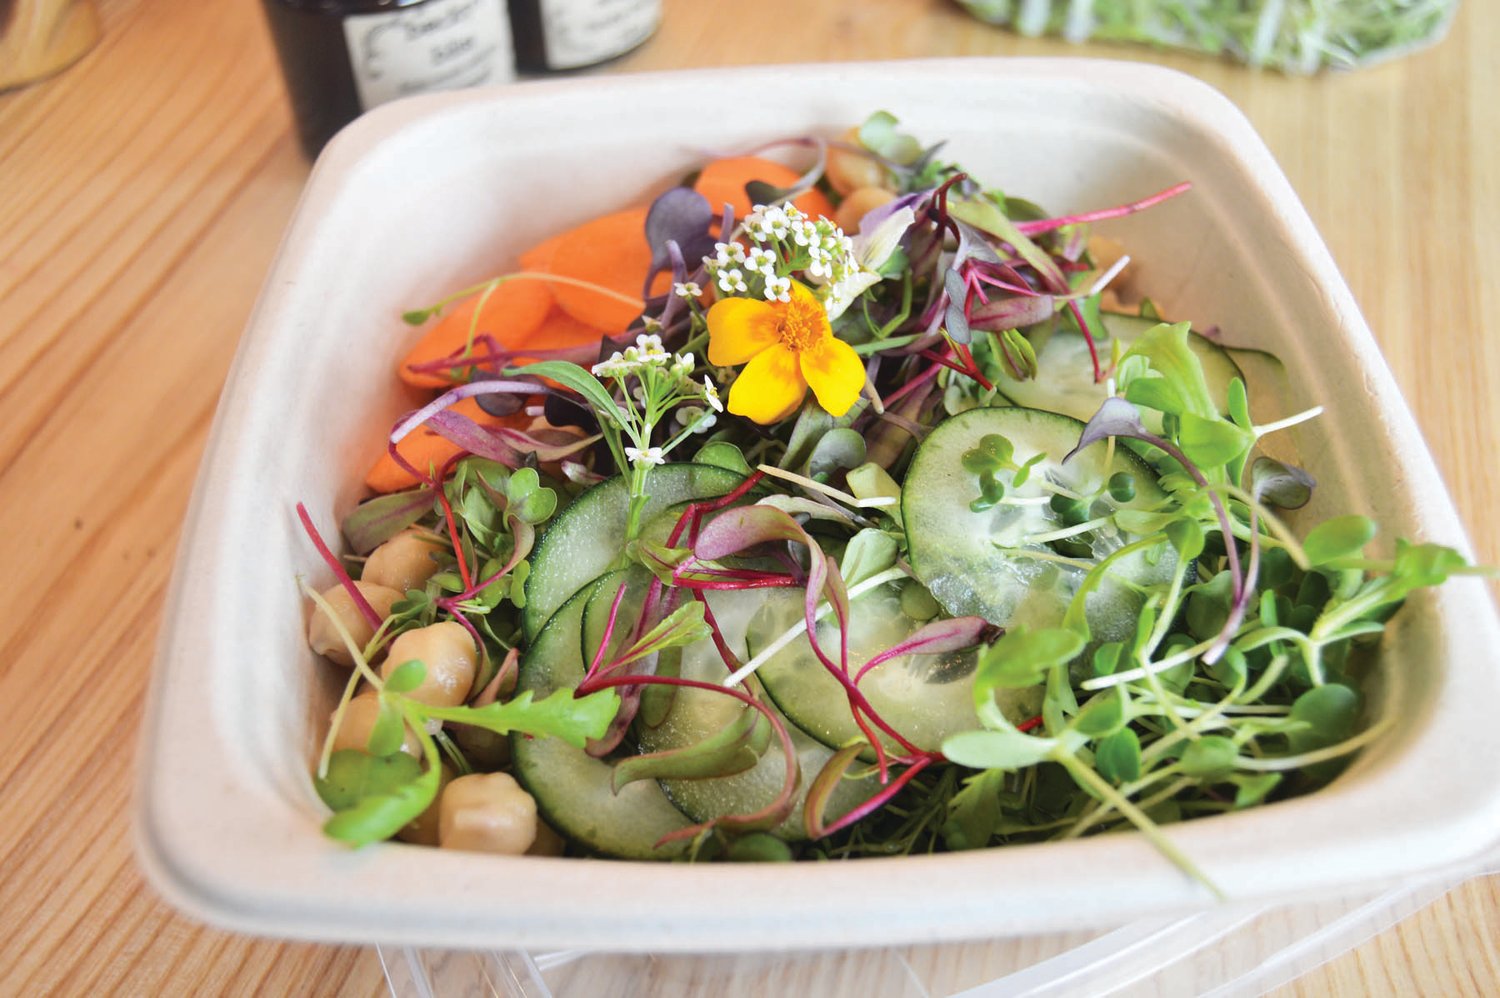 A microgreen salad using produce from Blue Moon Acres in Buckingham is just one item on an extensive menu that includes juices, smoothies, waffles, coffees and juice cleanses.